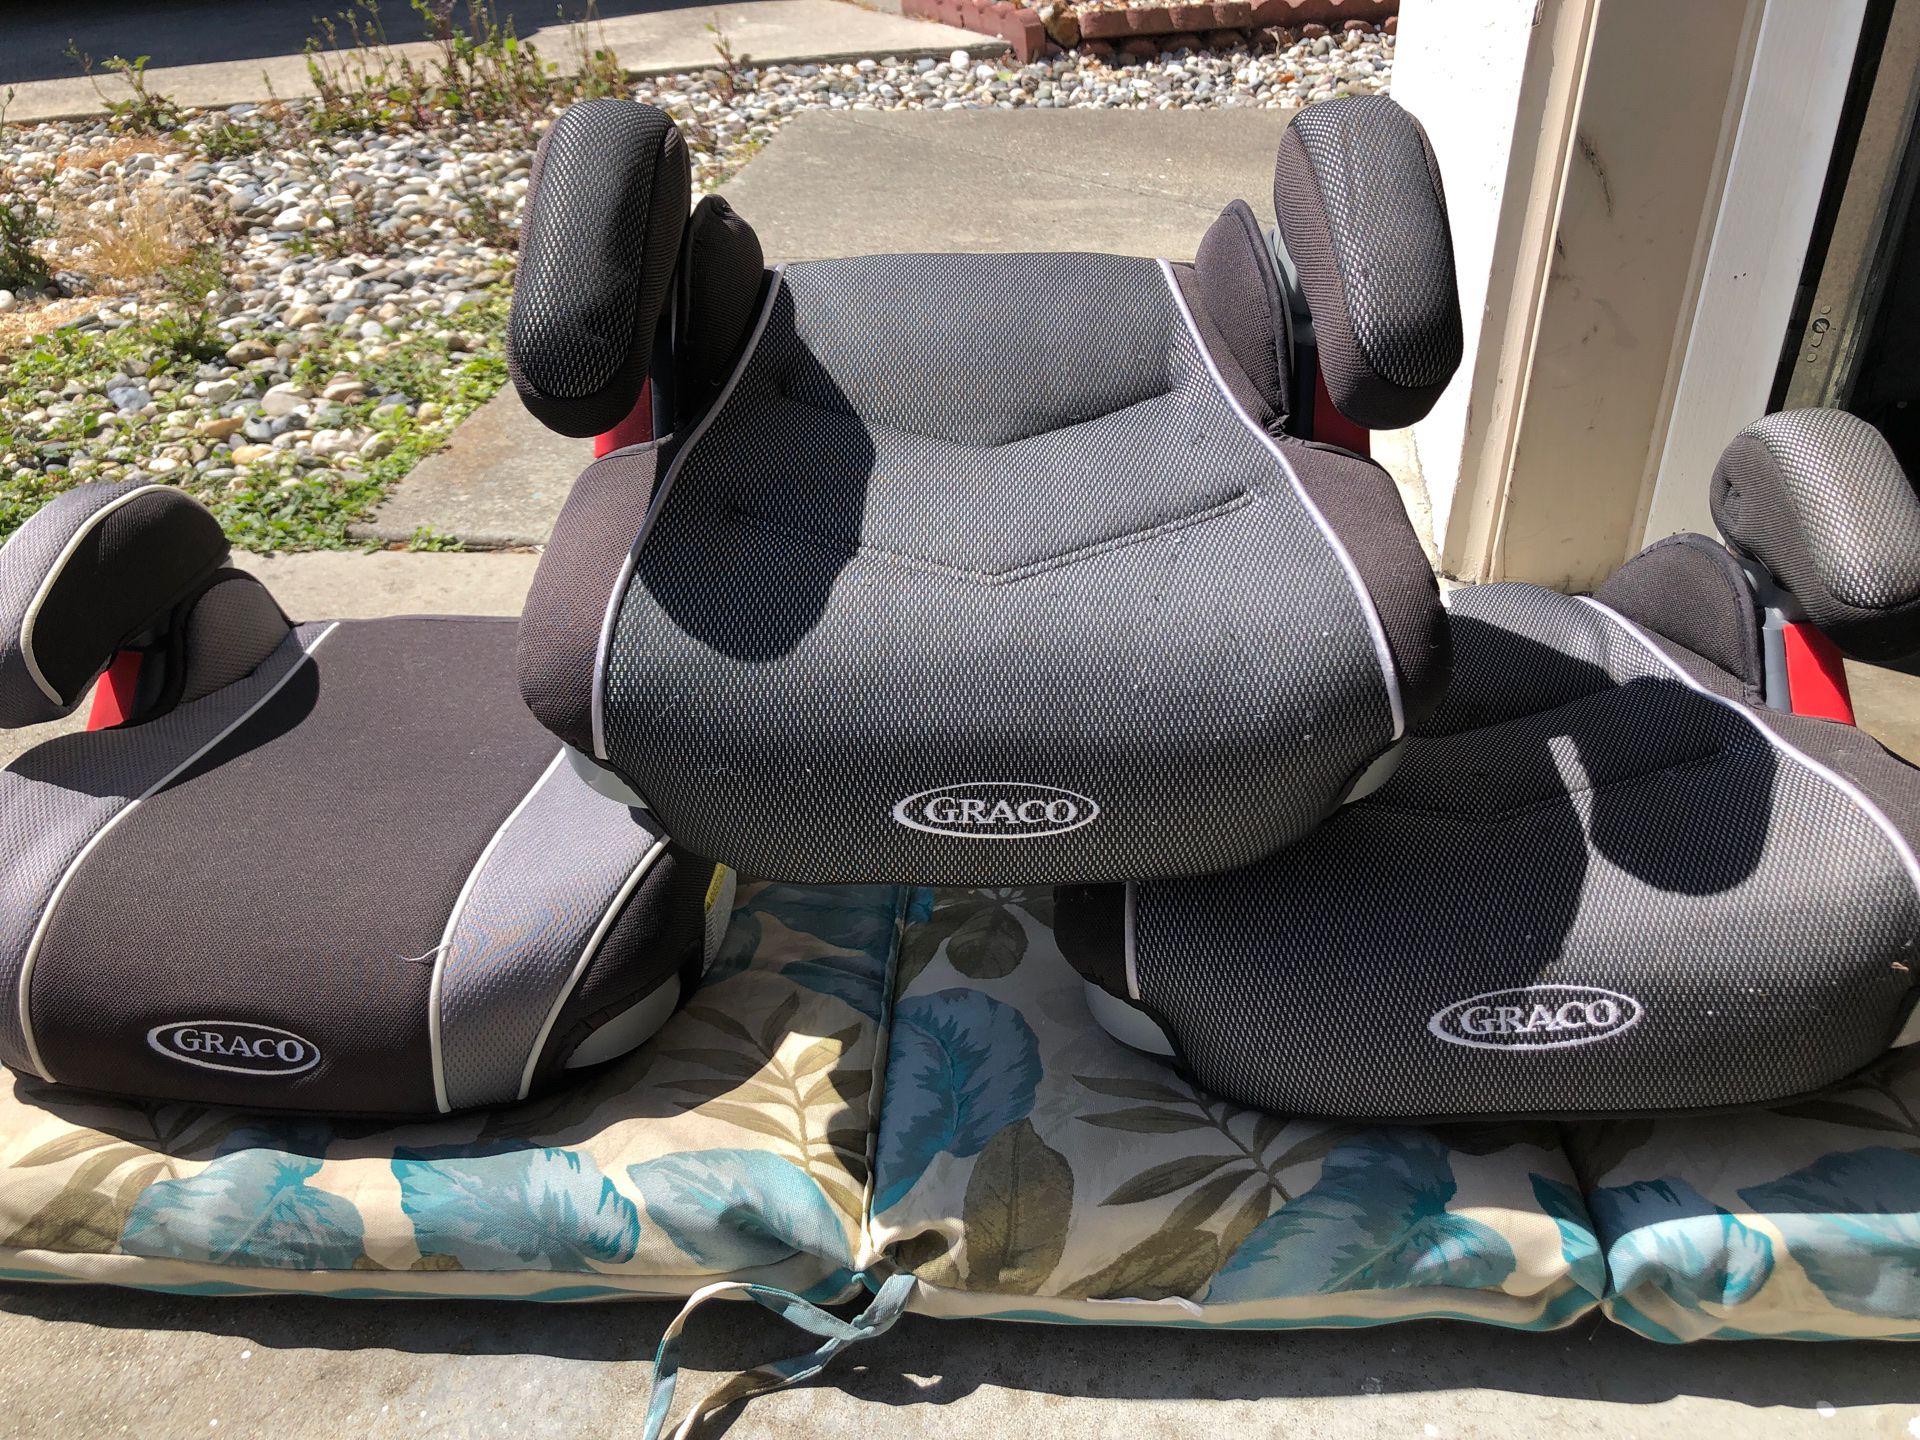 Graco backless booster Car Seats